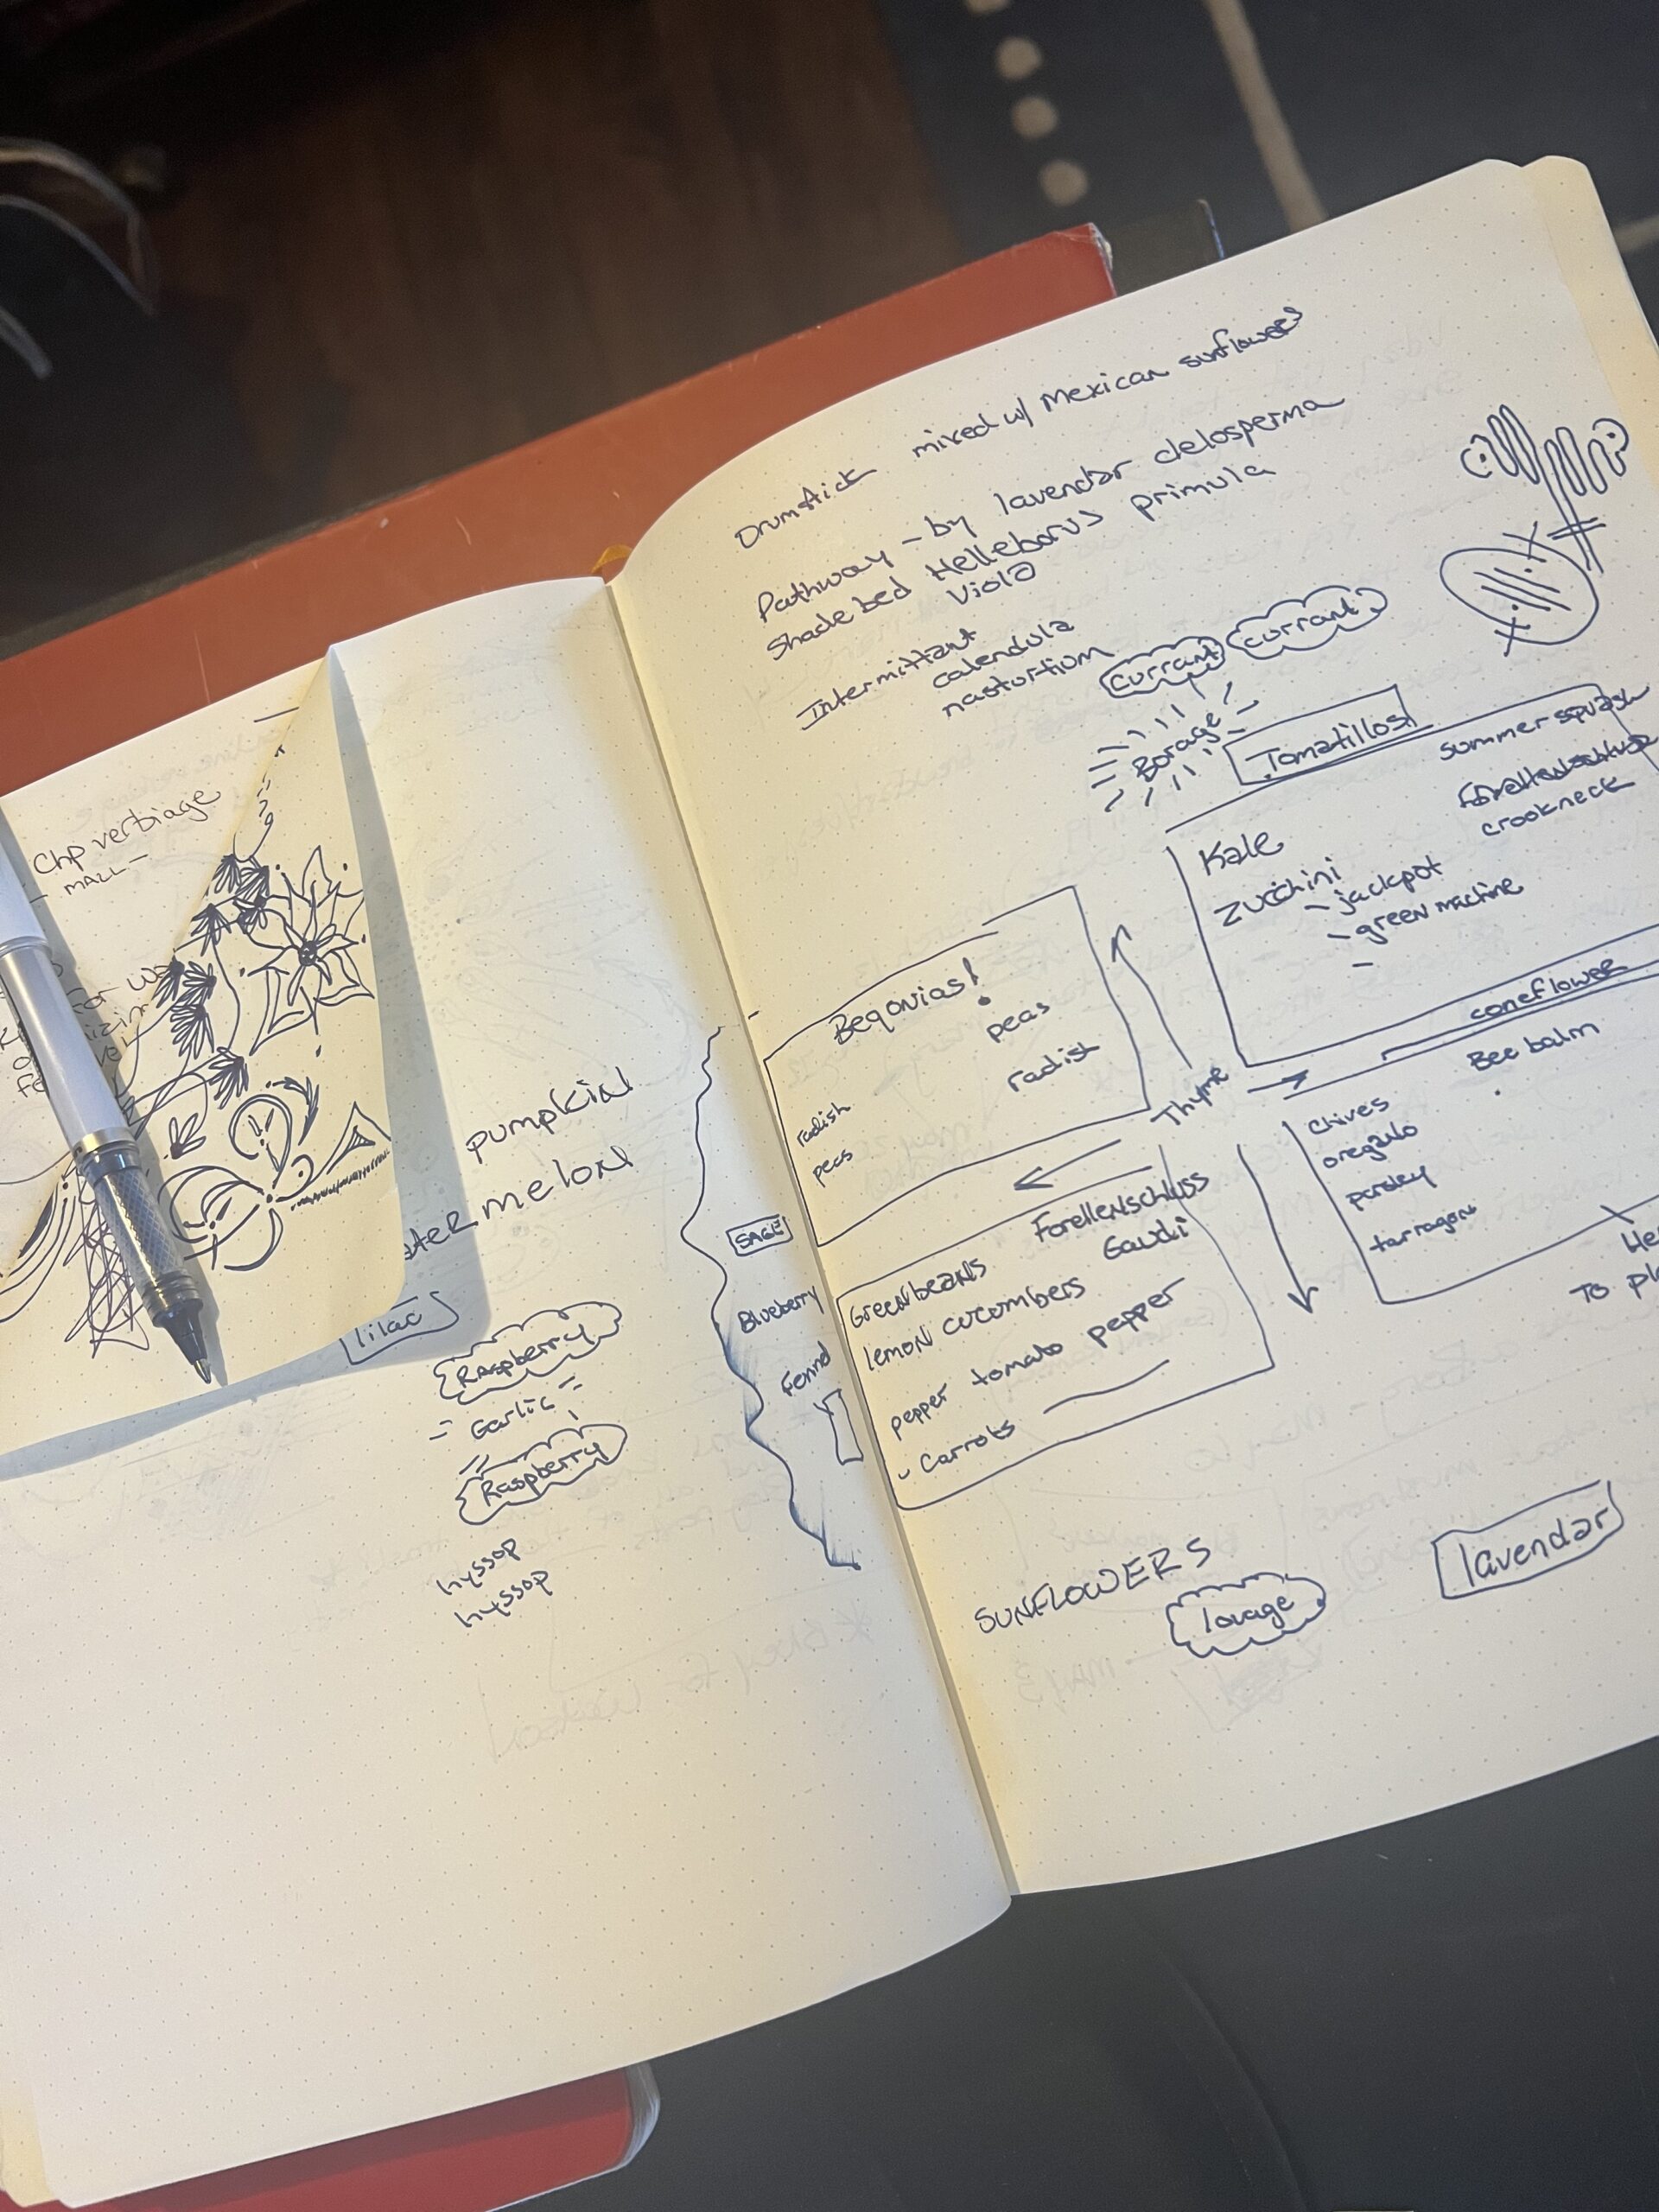 A restaurateur and part-time gardener's daily journal with a sketched layout for the spring garden